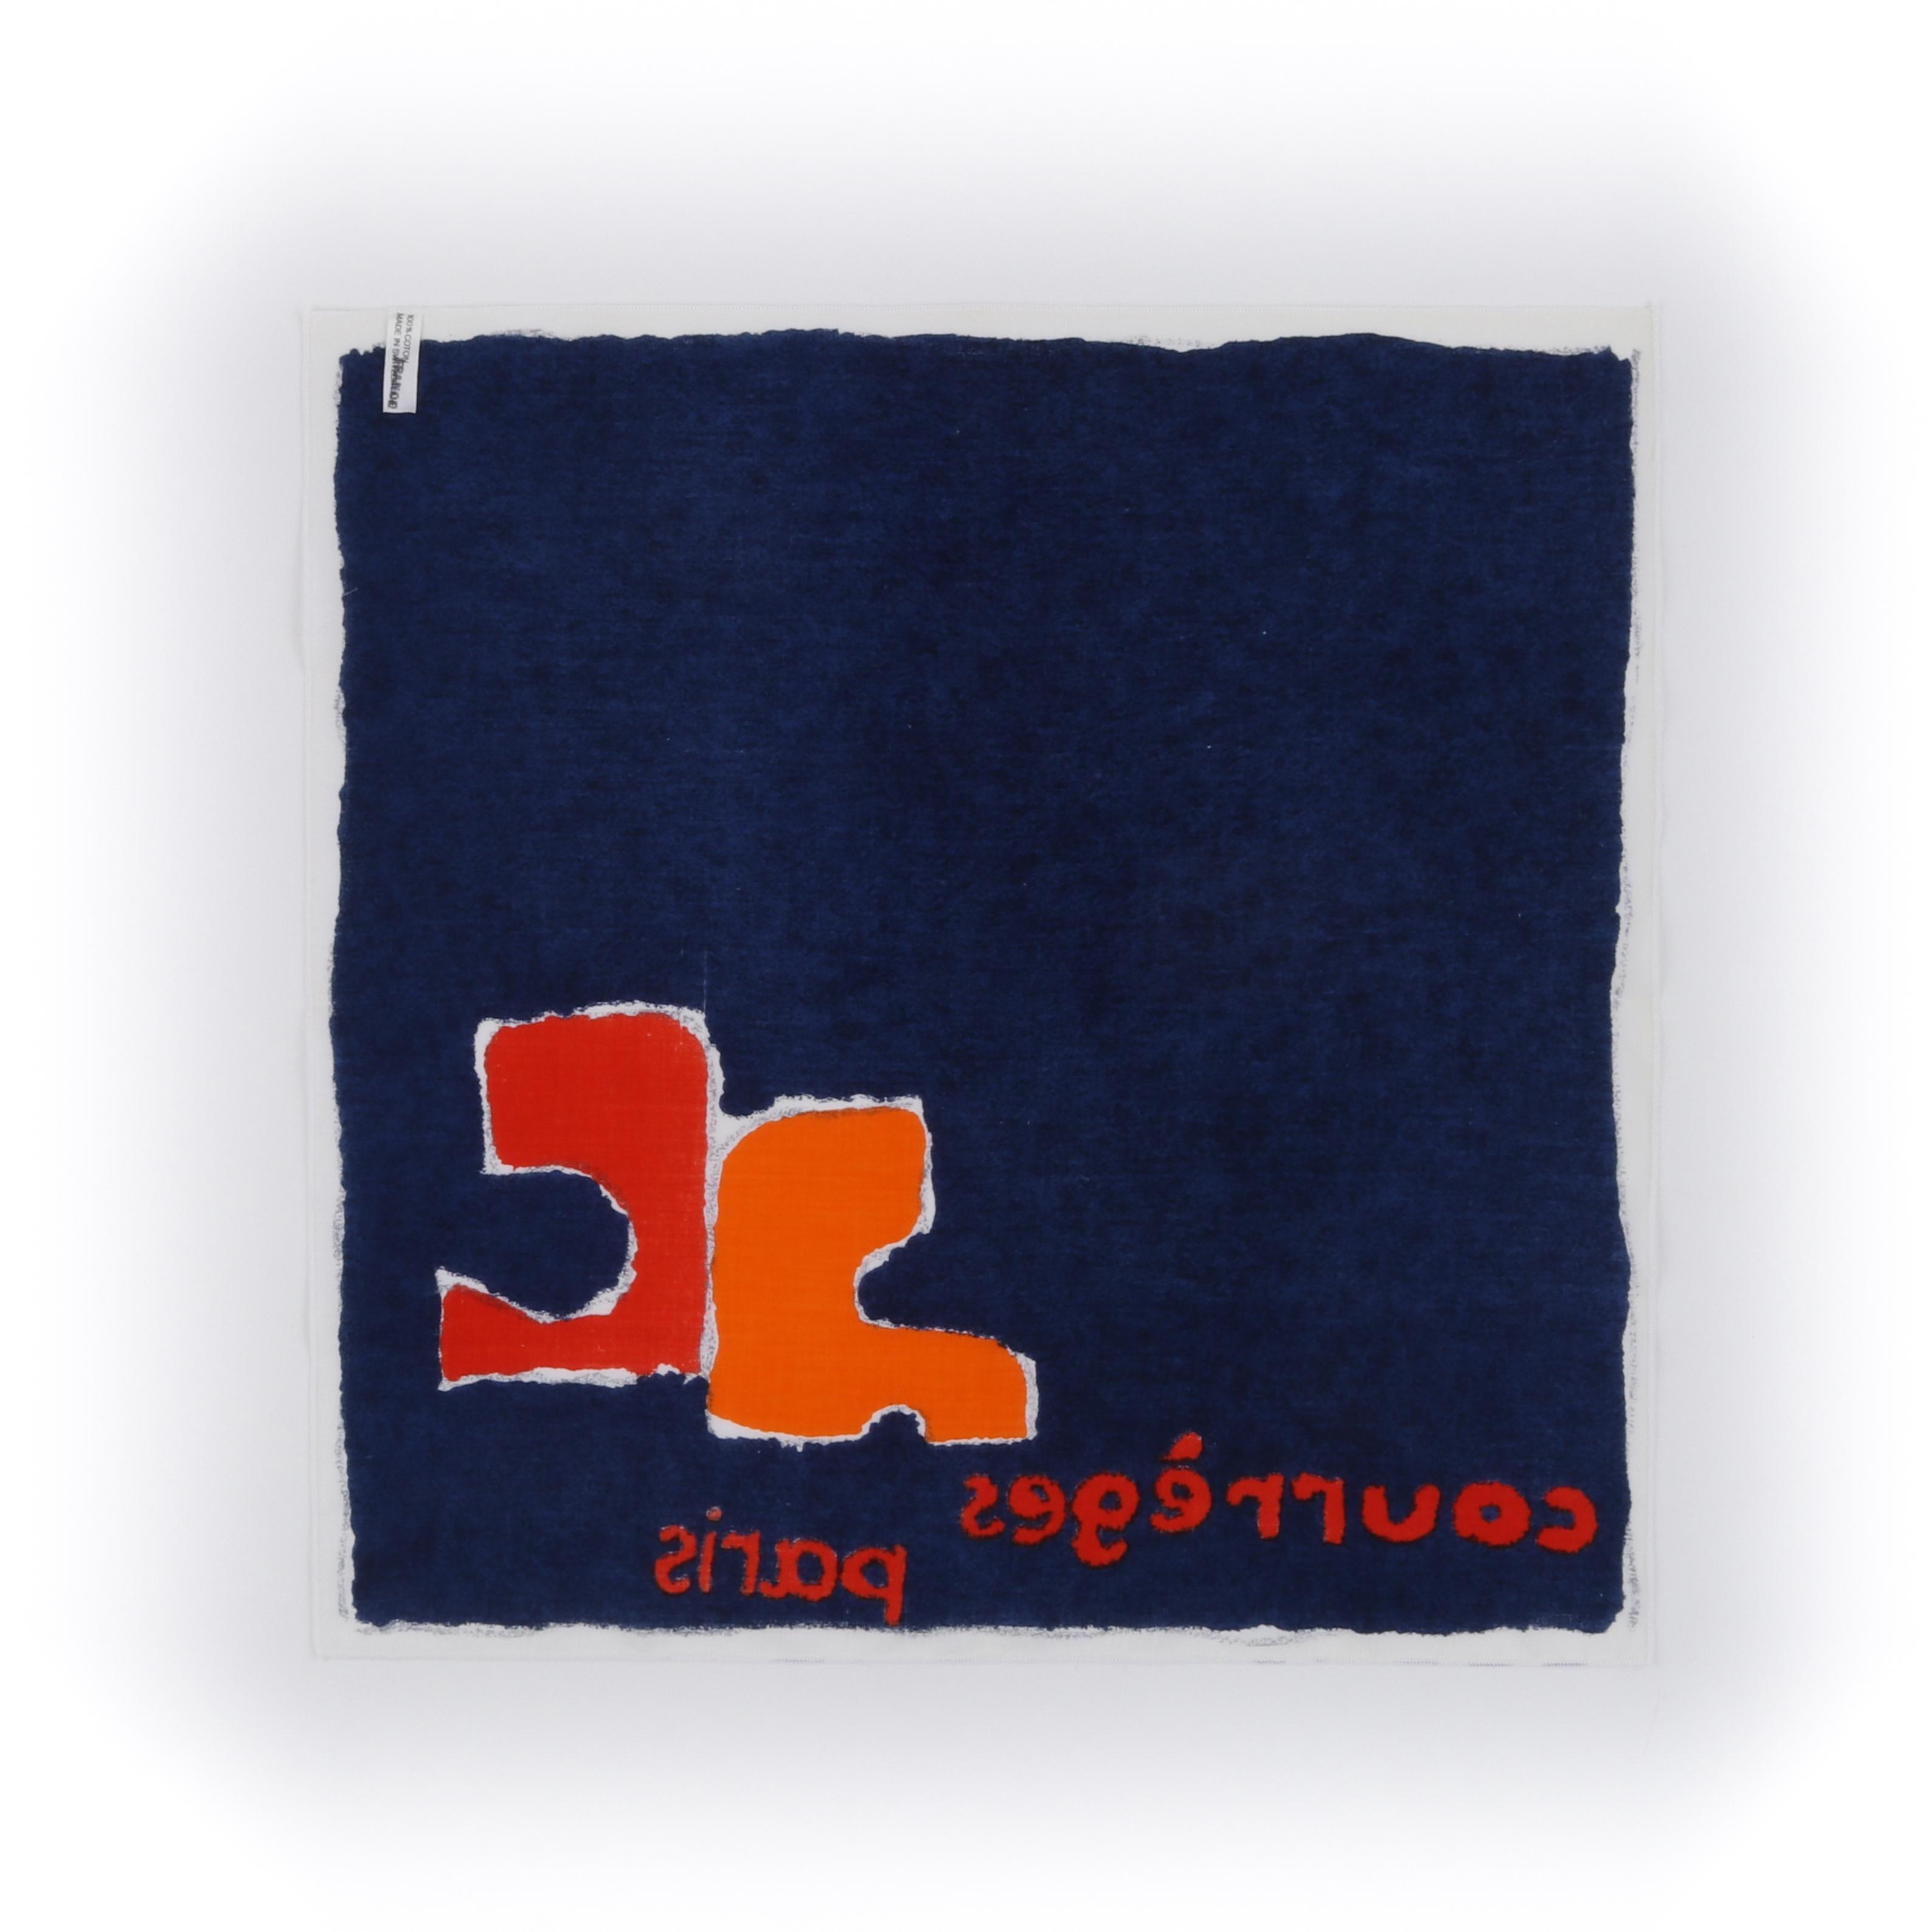 COURREGES c.1970's Navy & Orange Painterly Logo Square Scarf  

Circa: 1970’s
Brand / Manufacturer: Courrèges
Designer: André Courrèges
Style: Square scarf
Color(s): Shades of navy blue, orange, red, gray, white
Marked Fabric Content: “100%